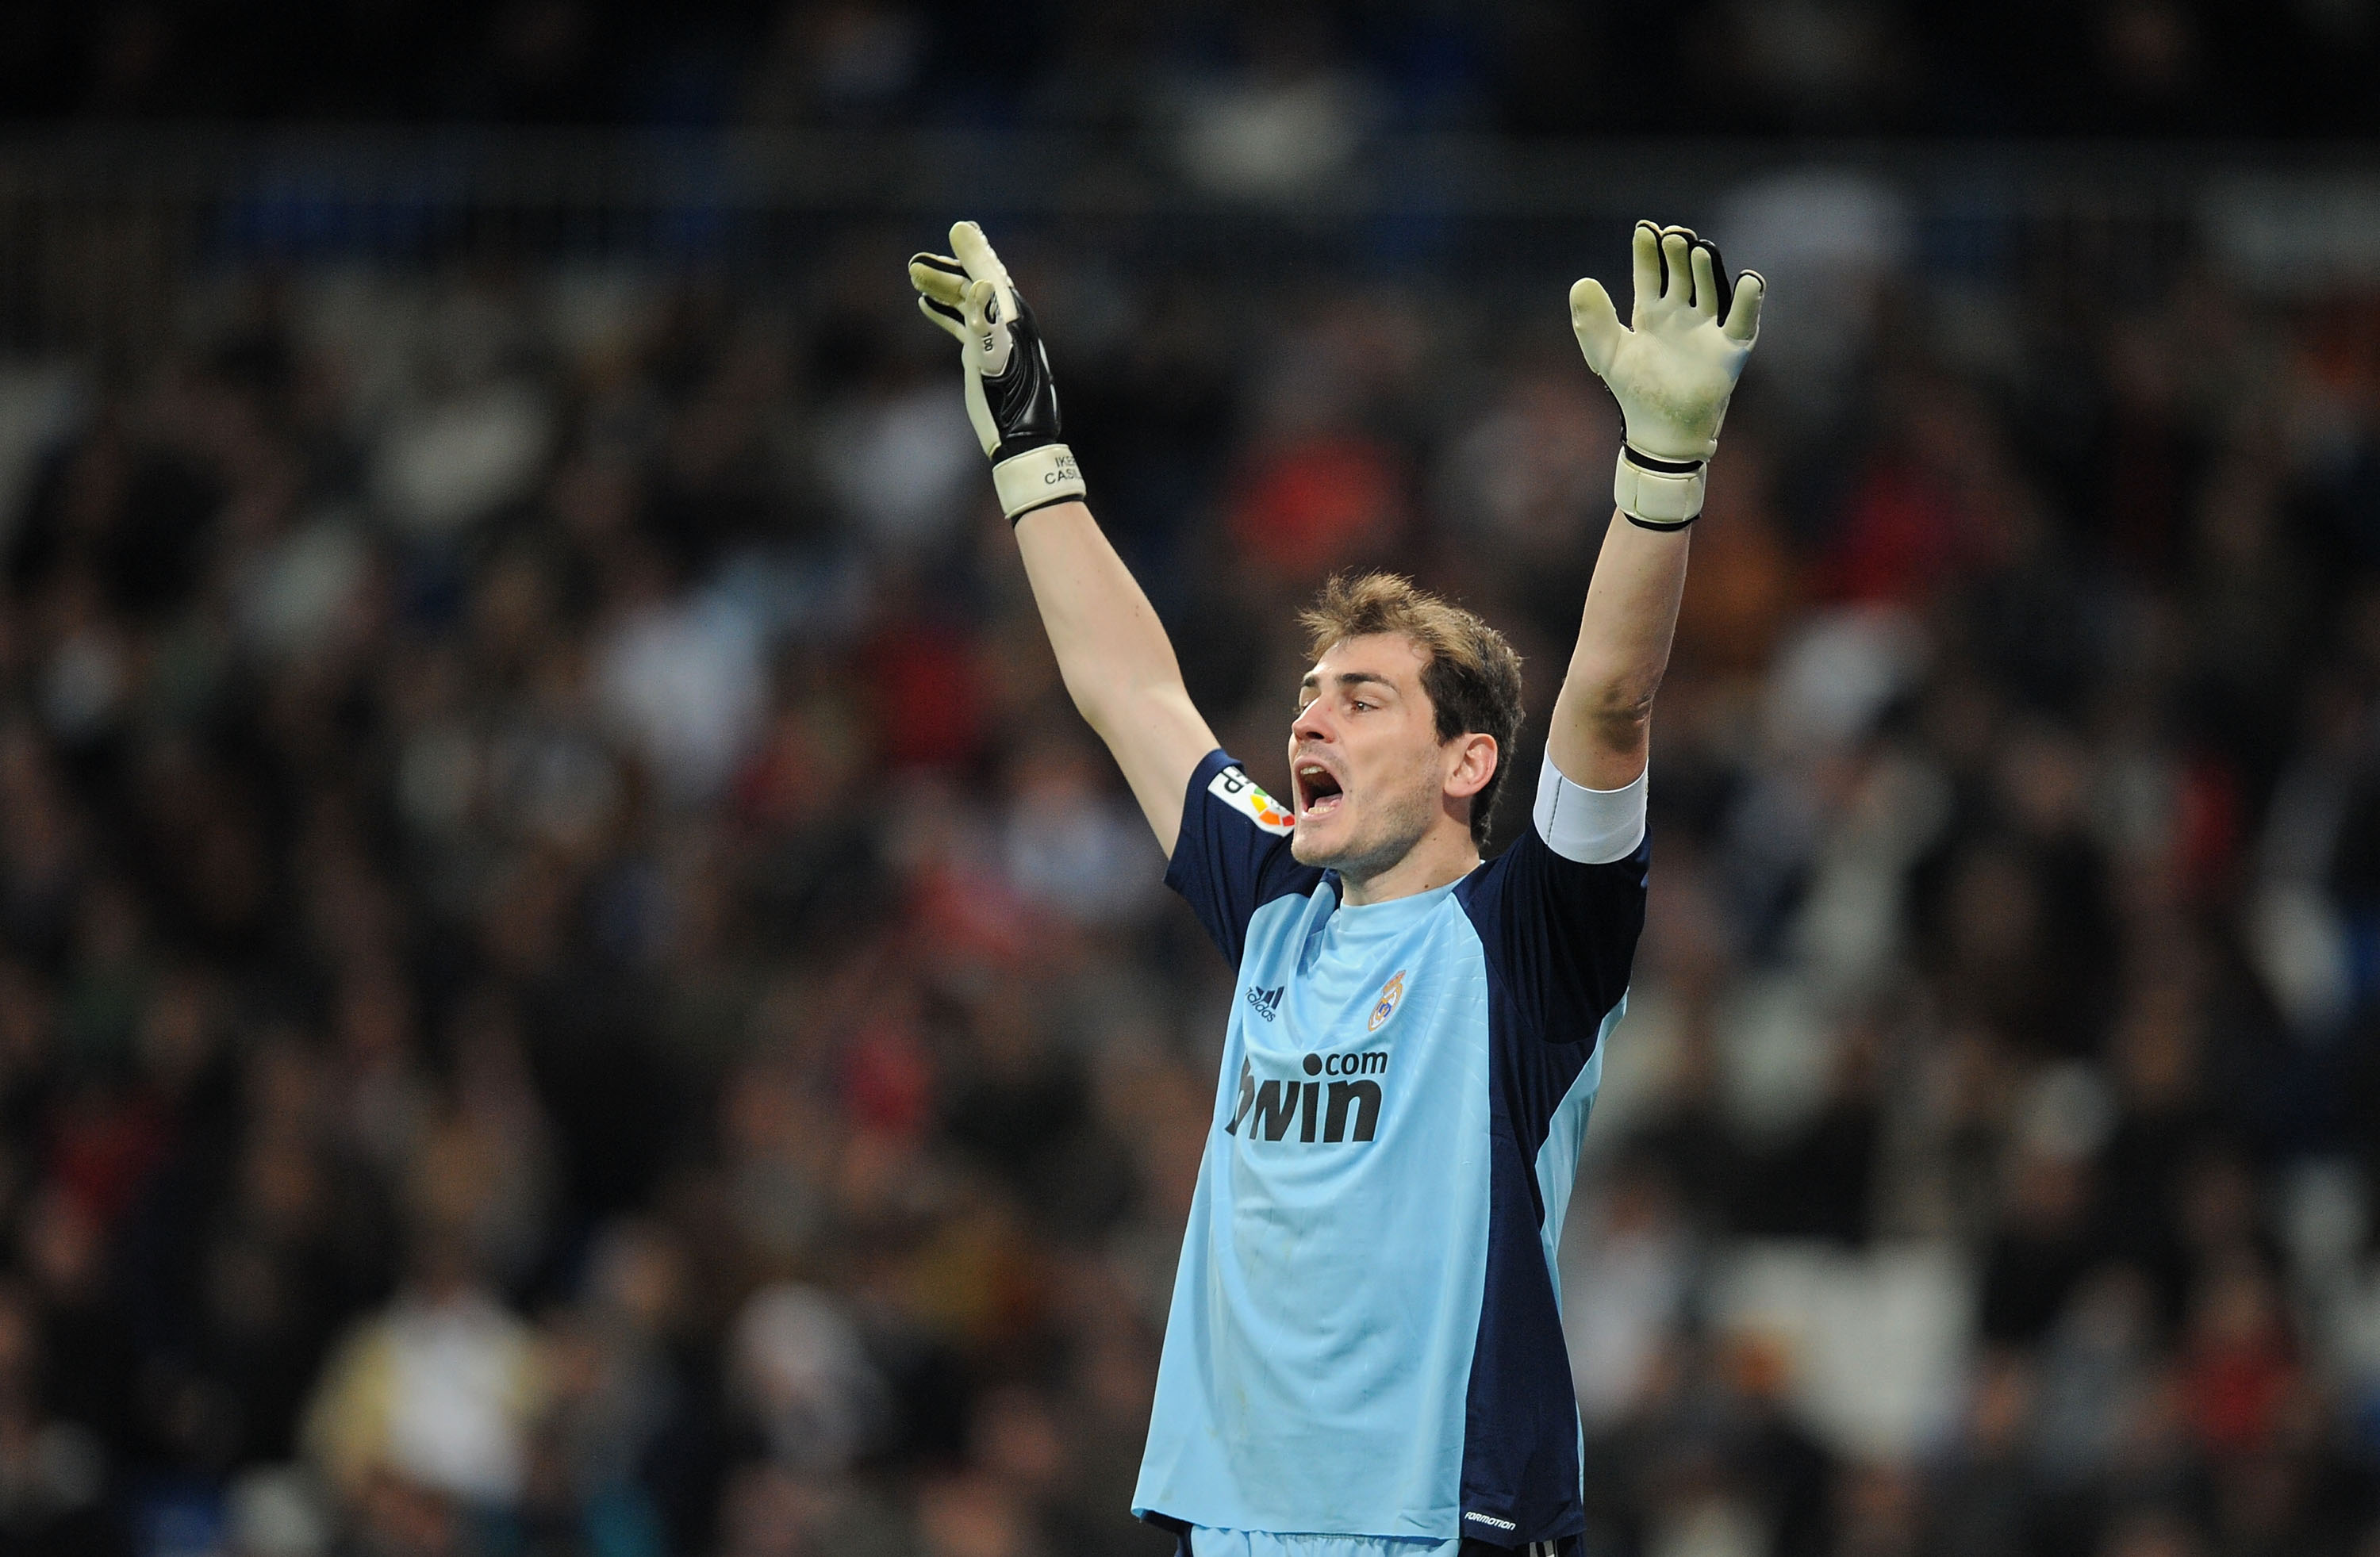 MADRID, SPAIN - FEBRUARY 02:  Iker Casillas of Real Madrid reacts during the Copa del Rey semi-final second leg match between Real Madrid and Sevilla at Estadio Santiago Bernabeu on February 2, 2011 in Madrid, Spain.  (Photo by Denis Doyle/Getty Images)